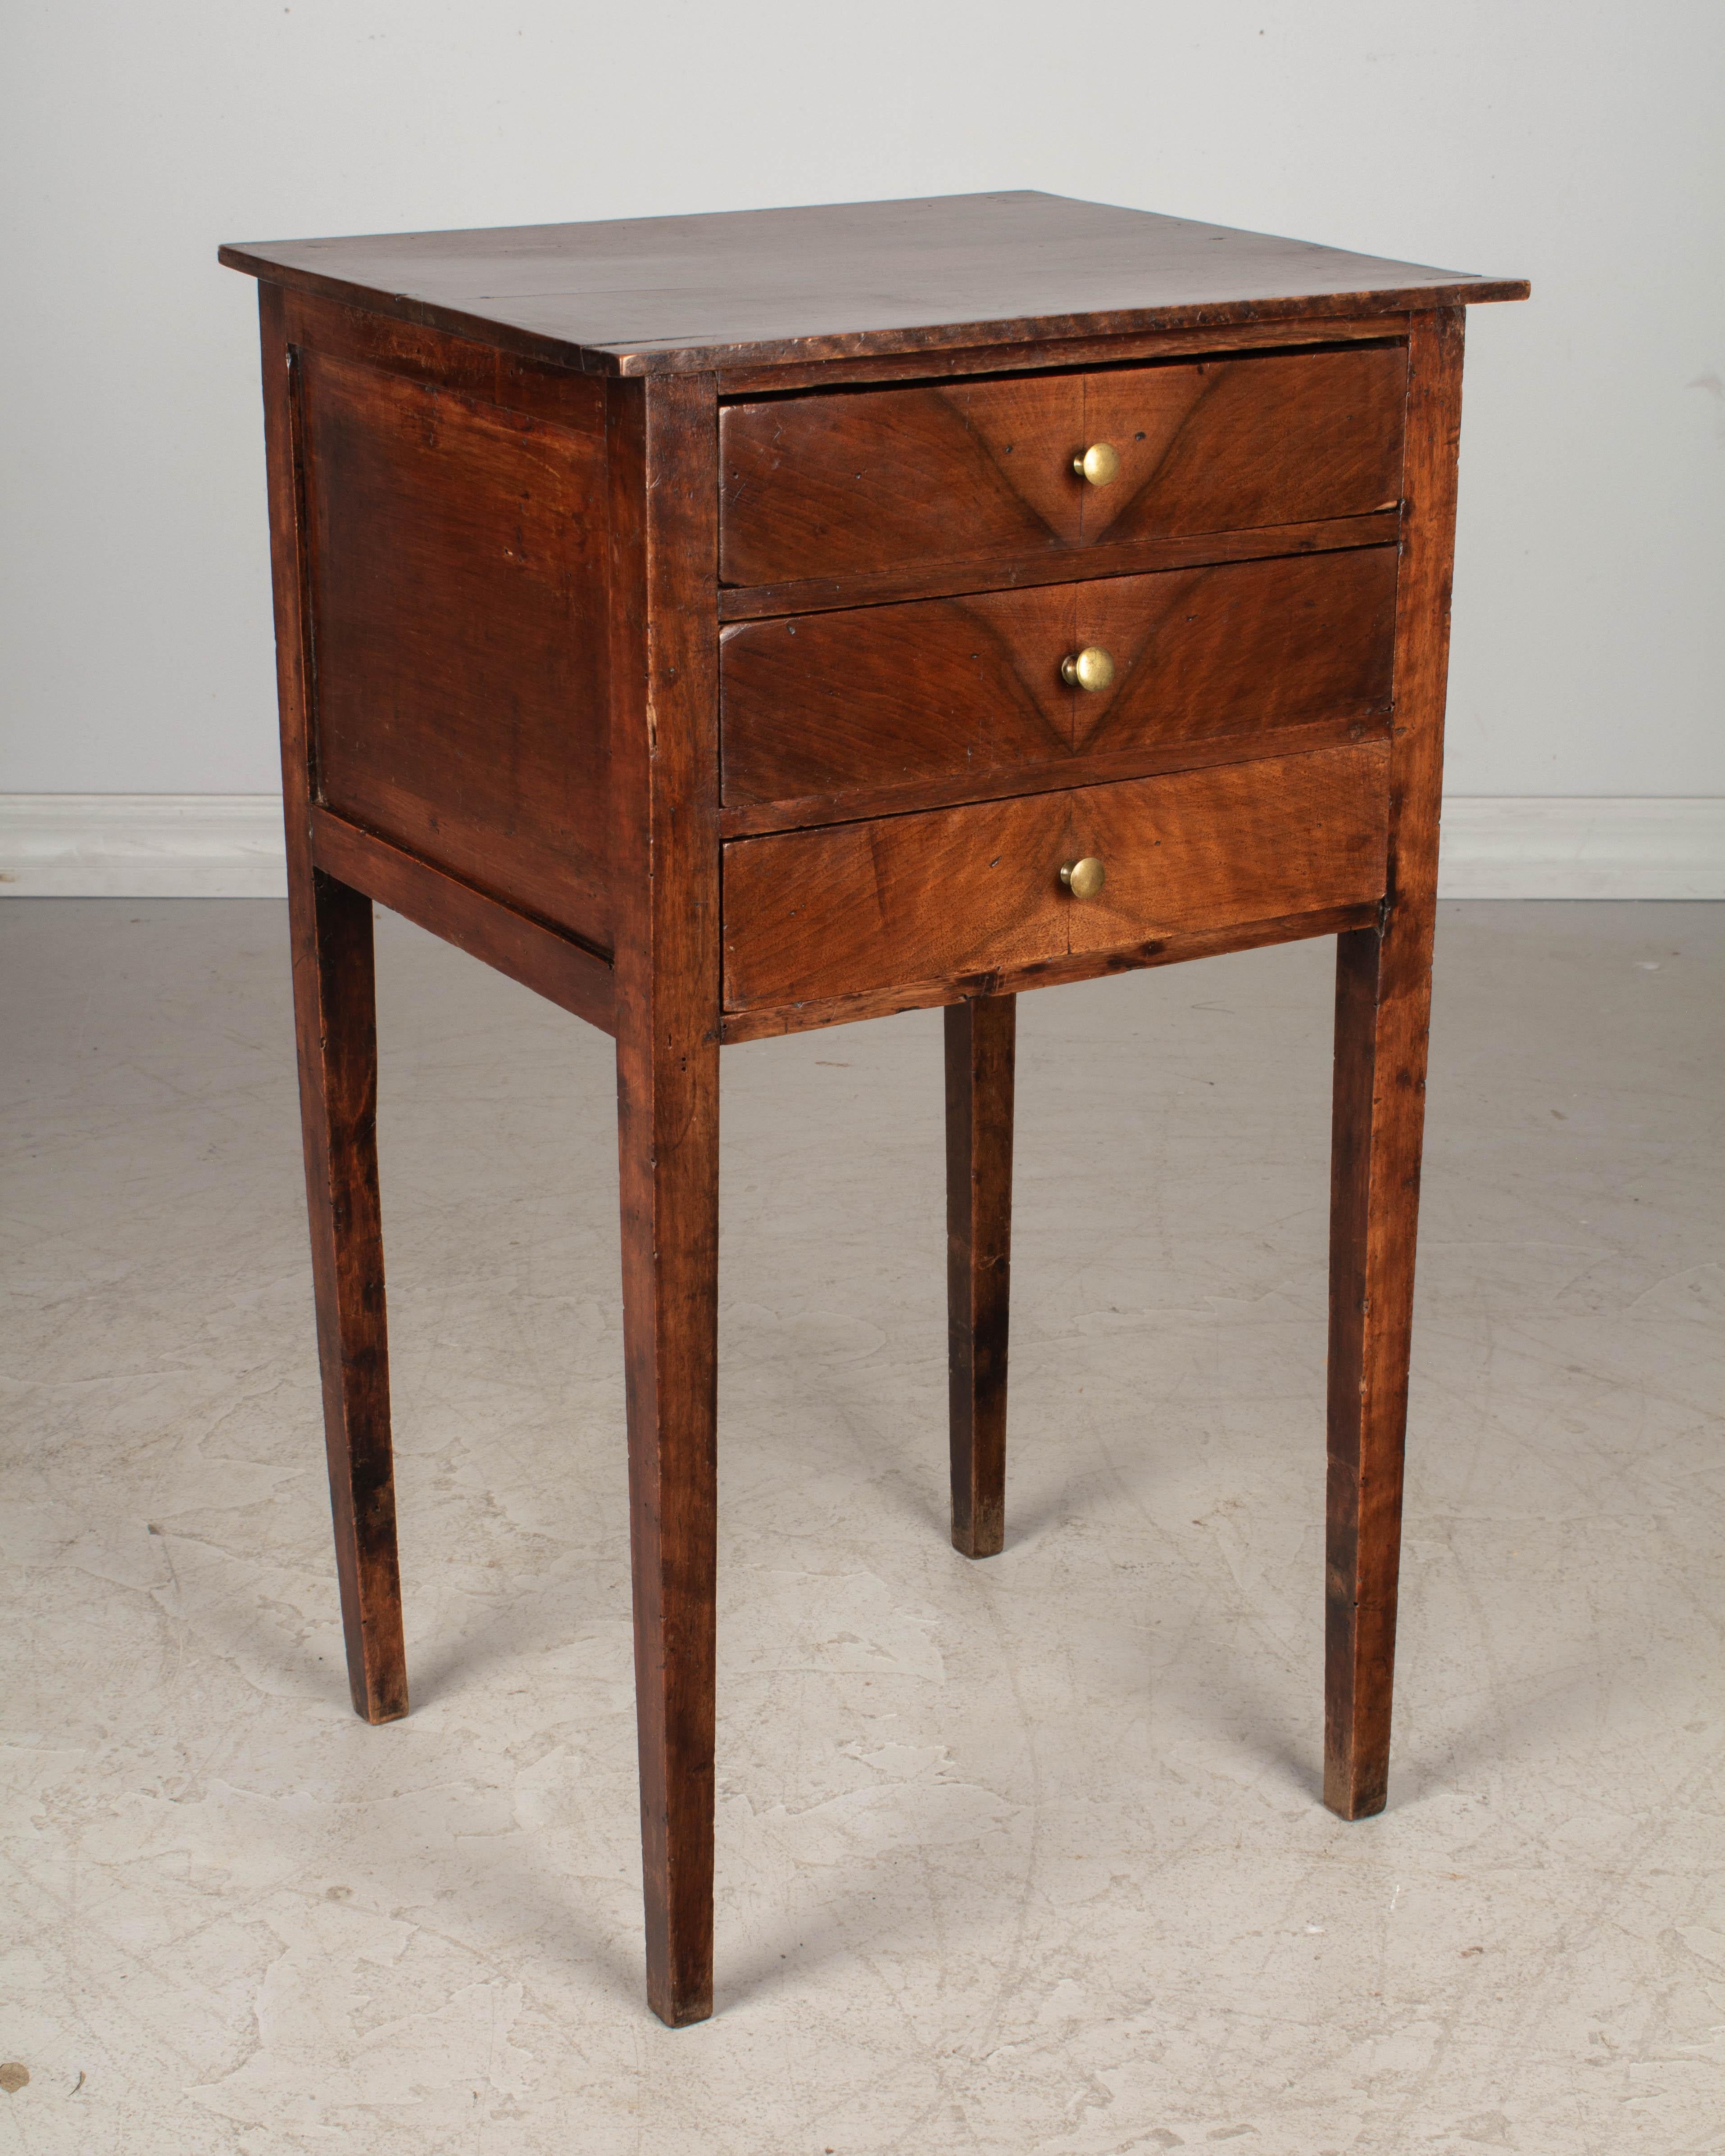 A late 19th century Country French walnut side table, or nightstand, with tapered legs and three dovetailed drawers with book matched face and small brass knobs. Handcrafted of solid walnut using pegged construction and mortise and tenon joints.